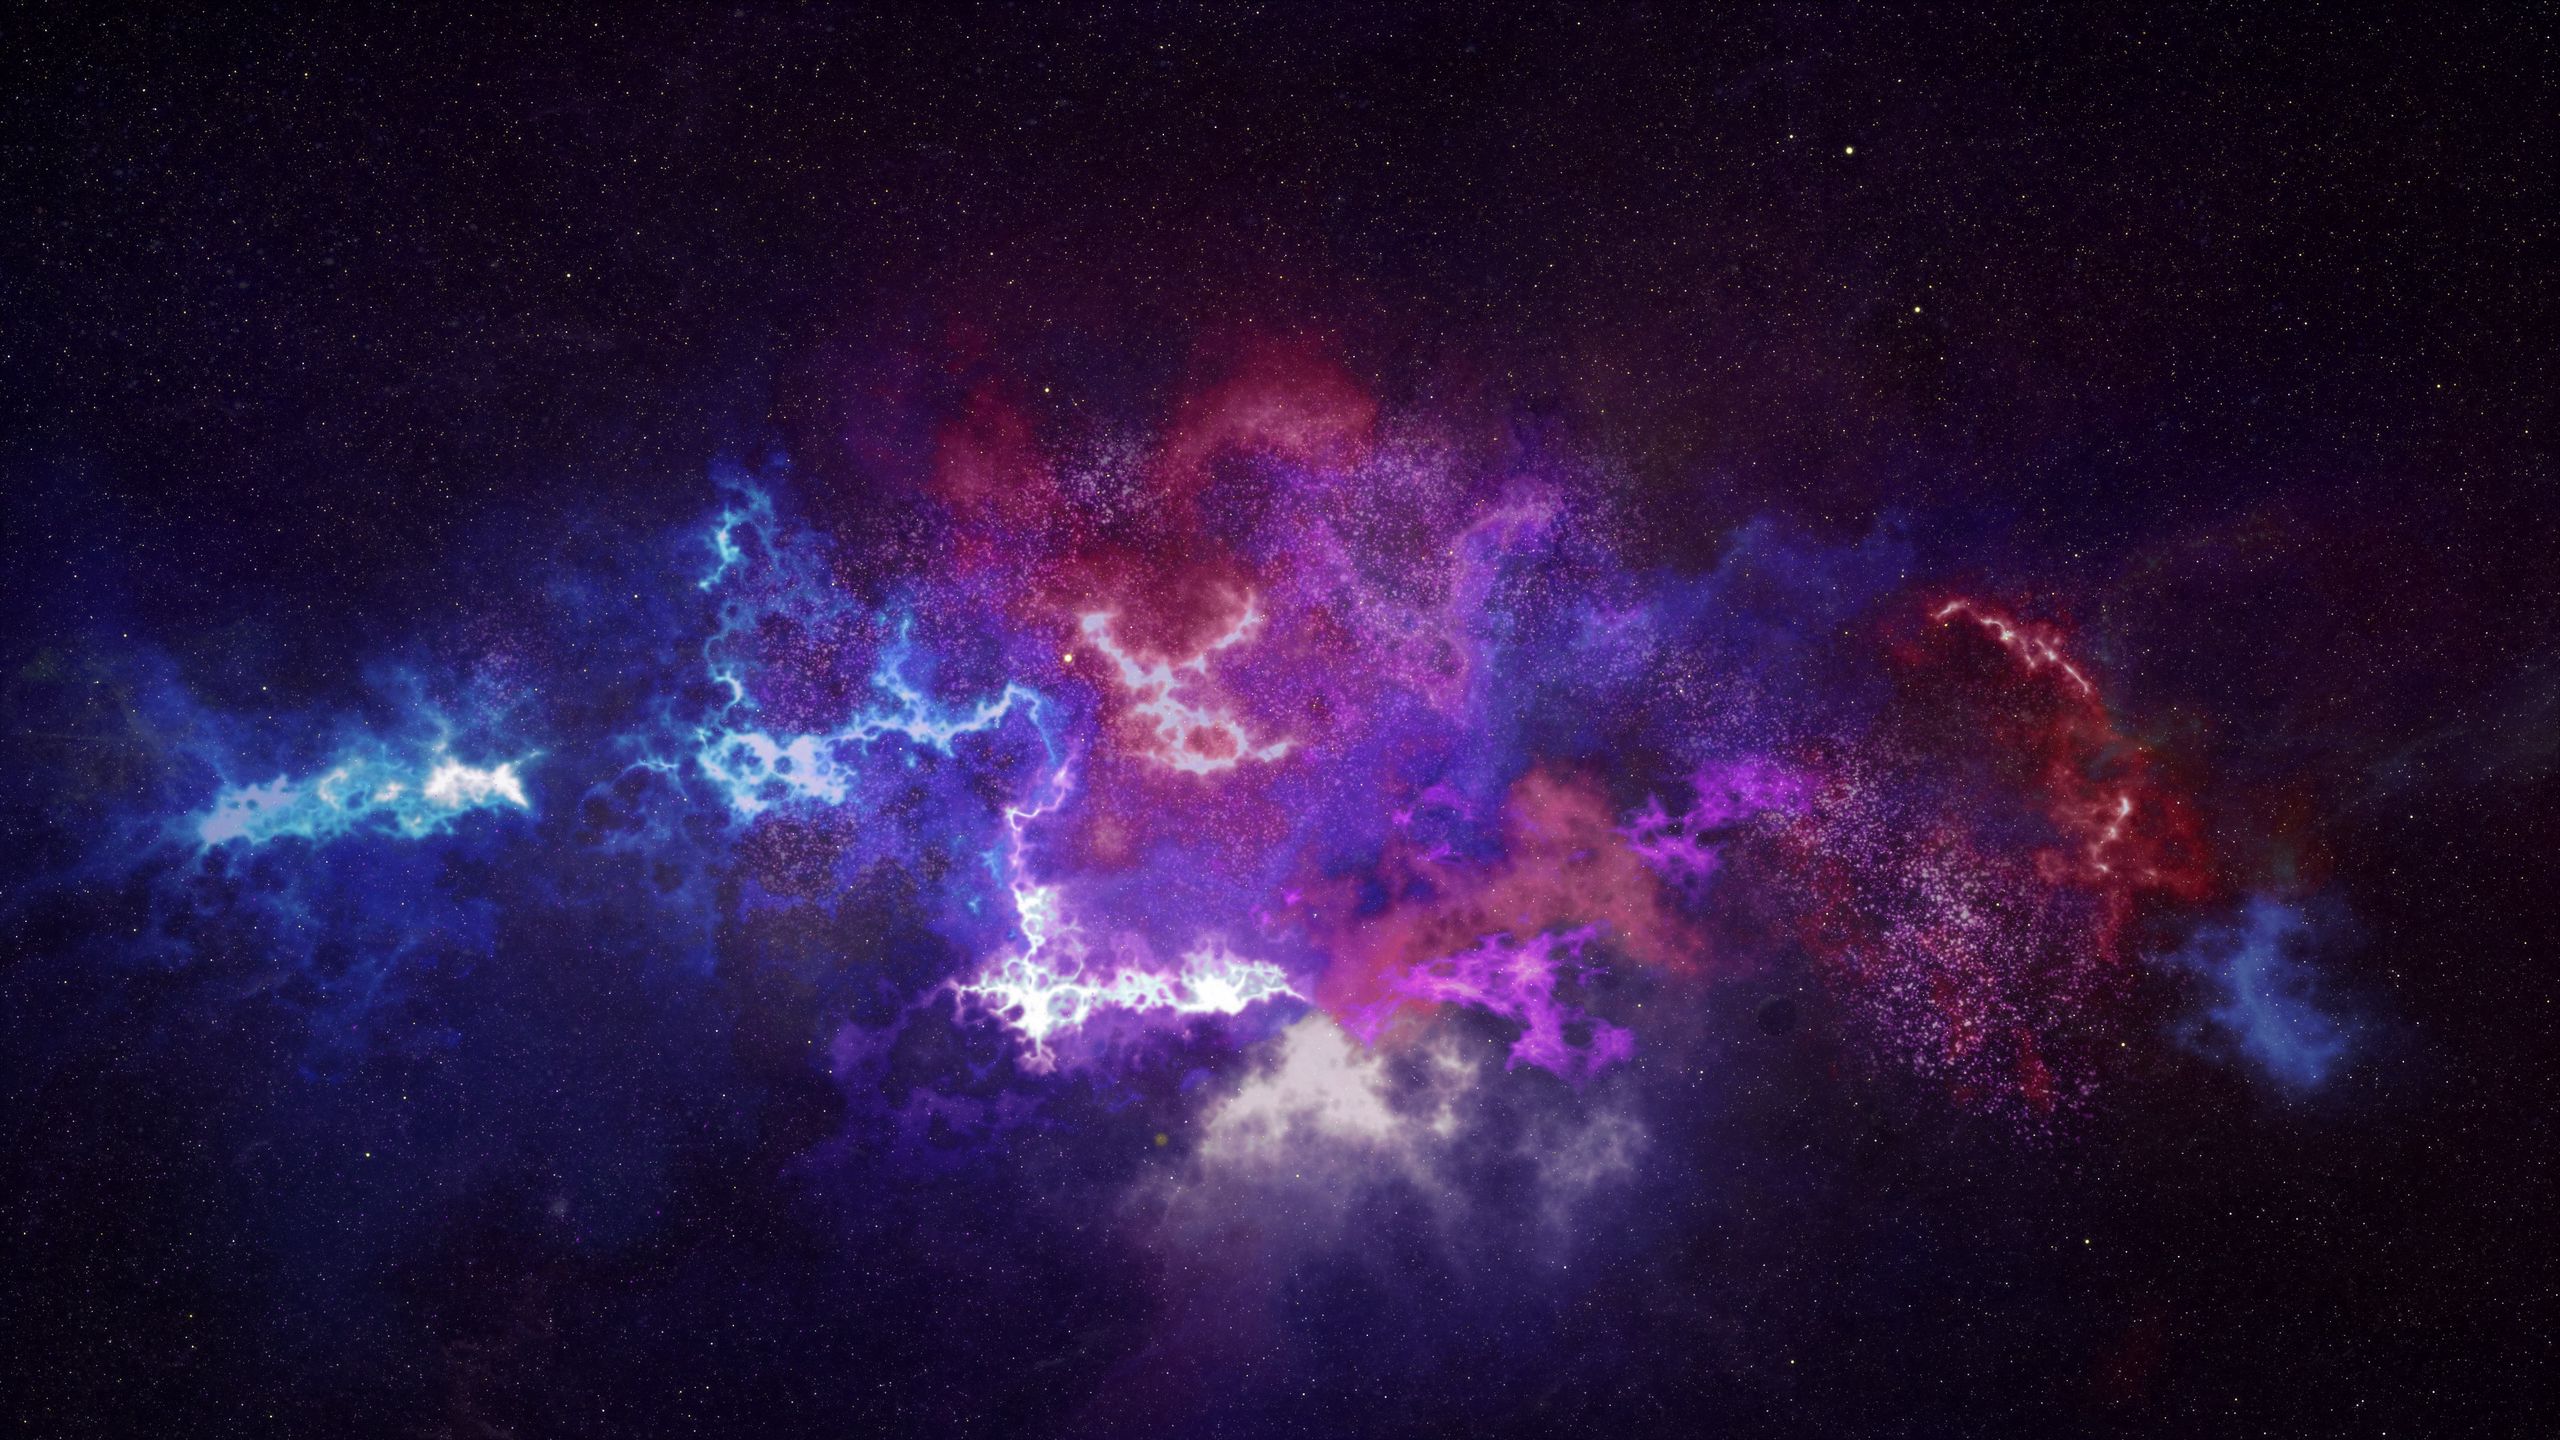 Download wallpaper 2560x1440 outer space, galaxy, constellation widescreen 16:9 HD background